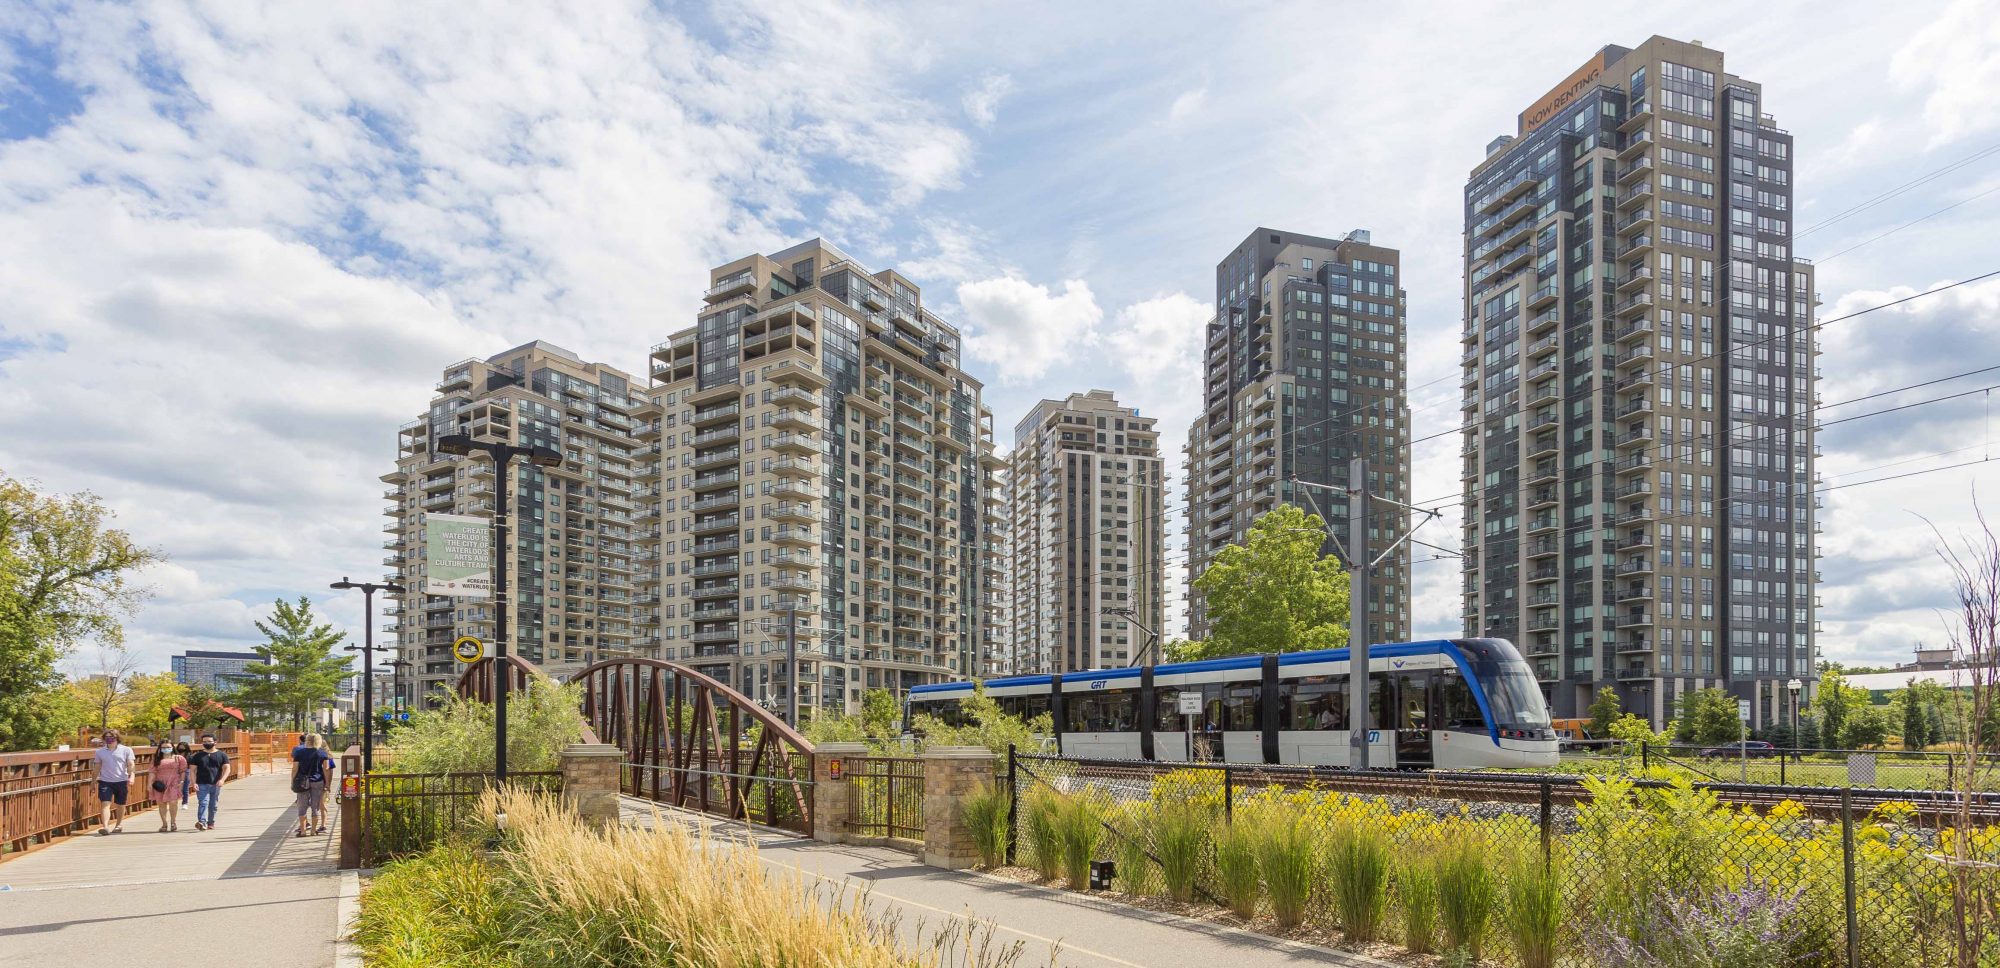 The ION Light Rail Transit train passes by the Barrel Yards residential complex in Uptown Waterloo.